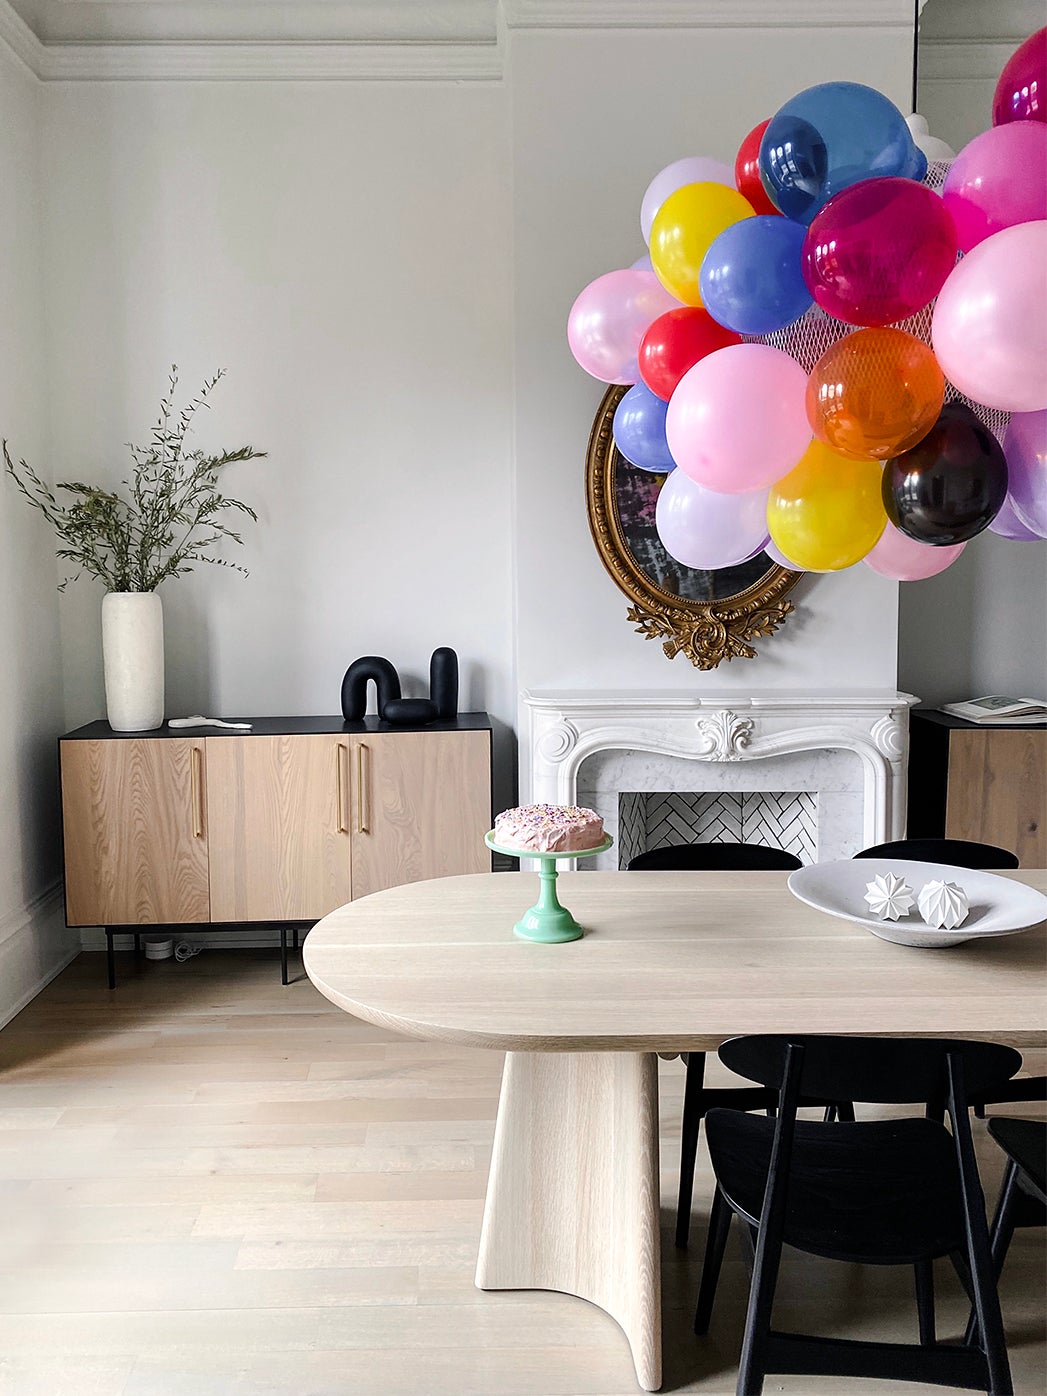 dining table with balloons over it